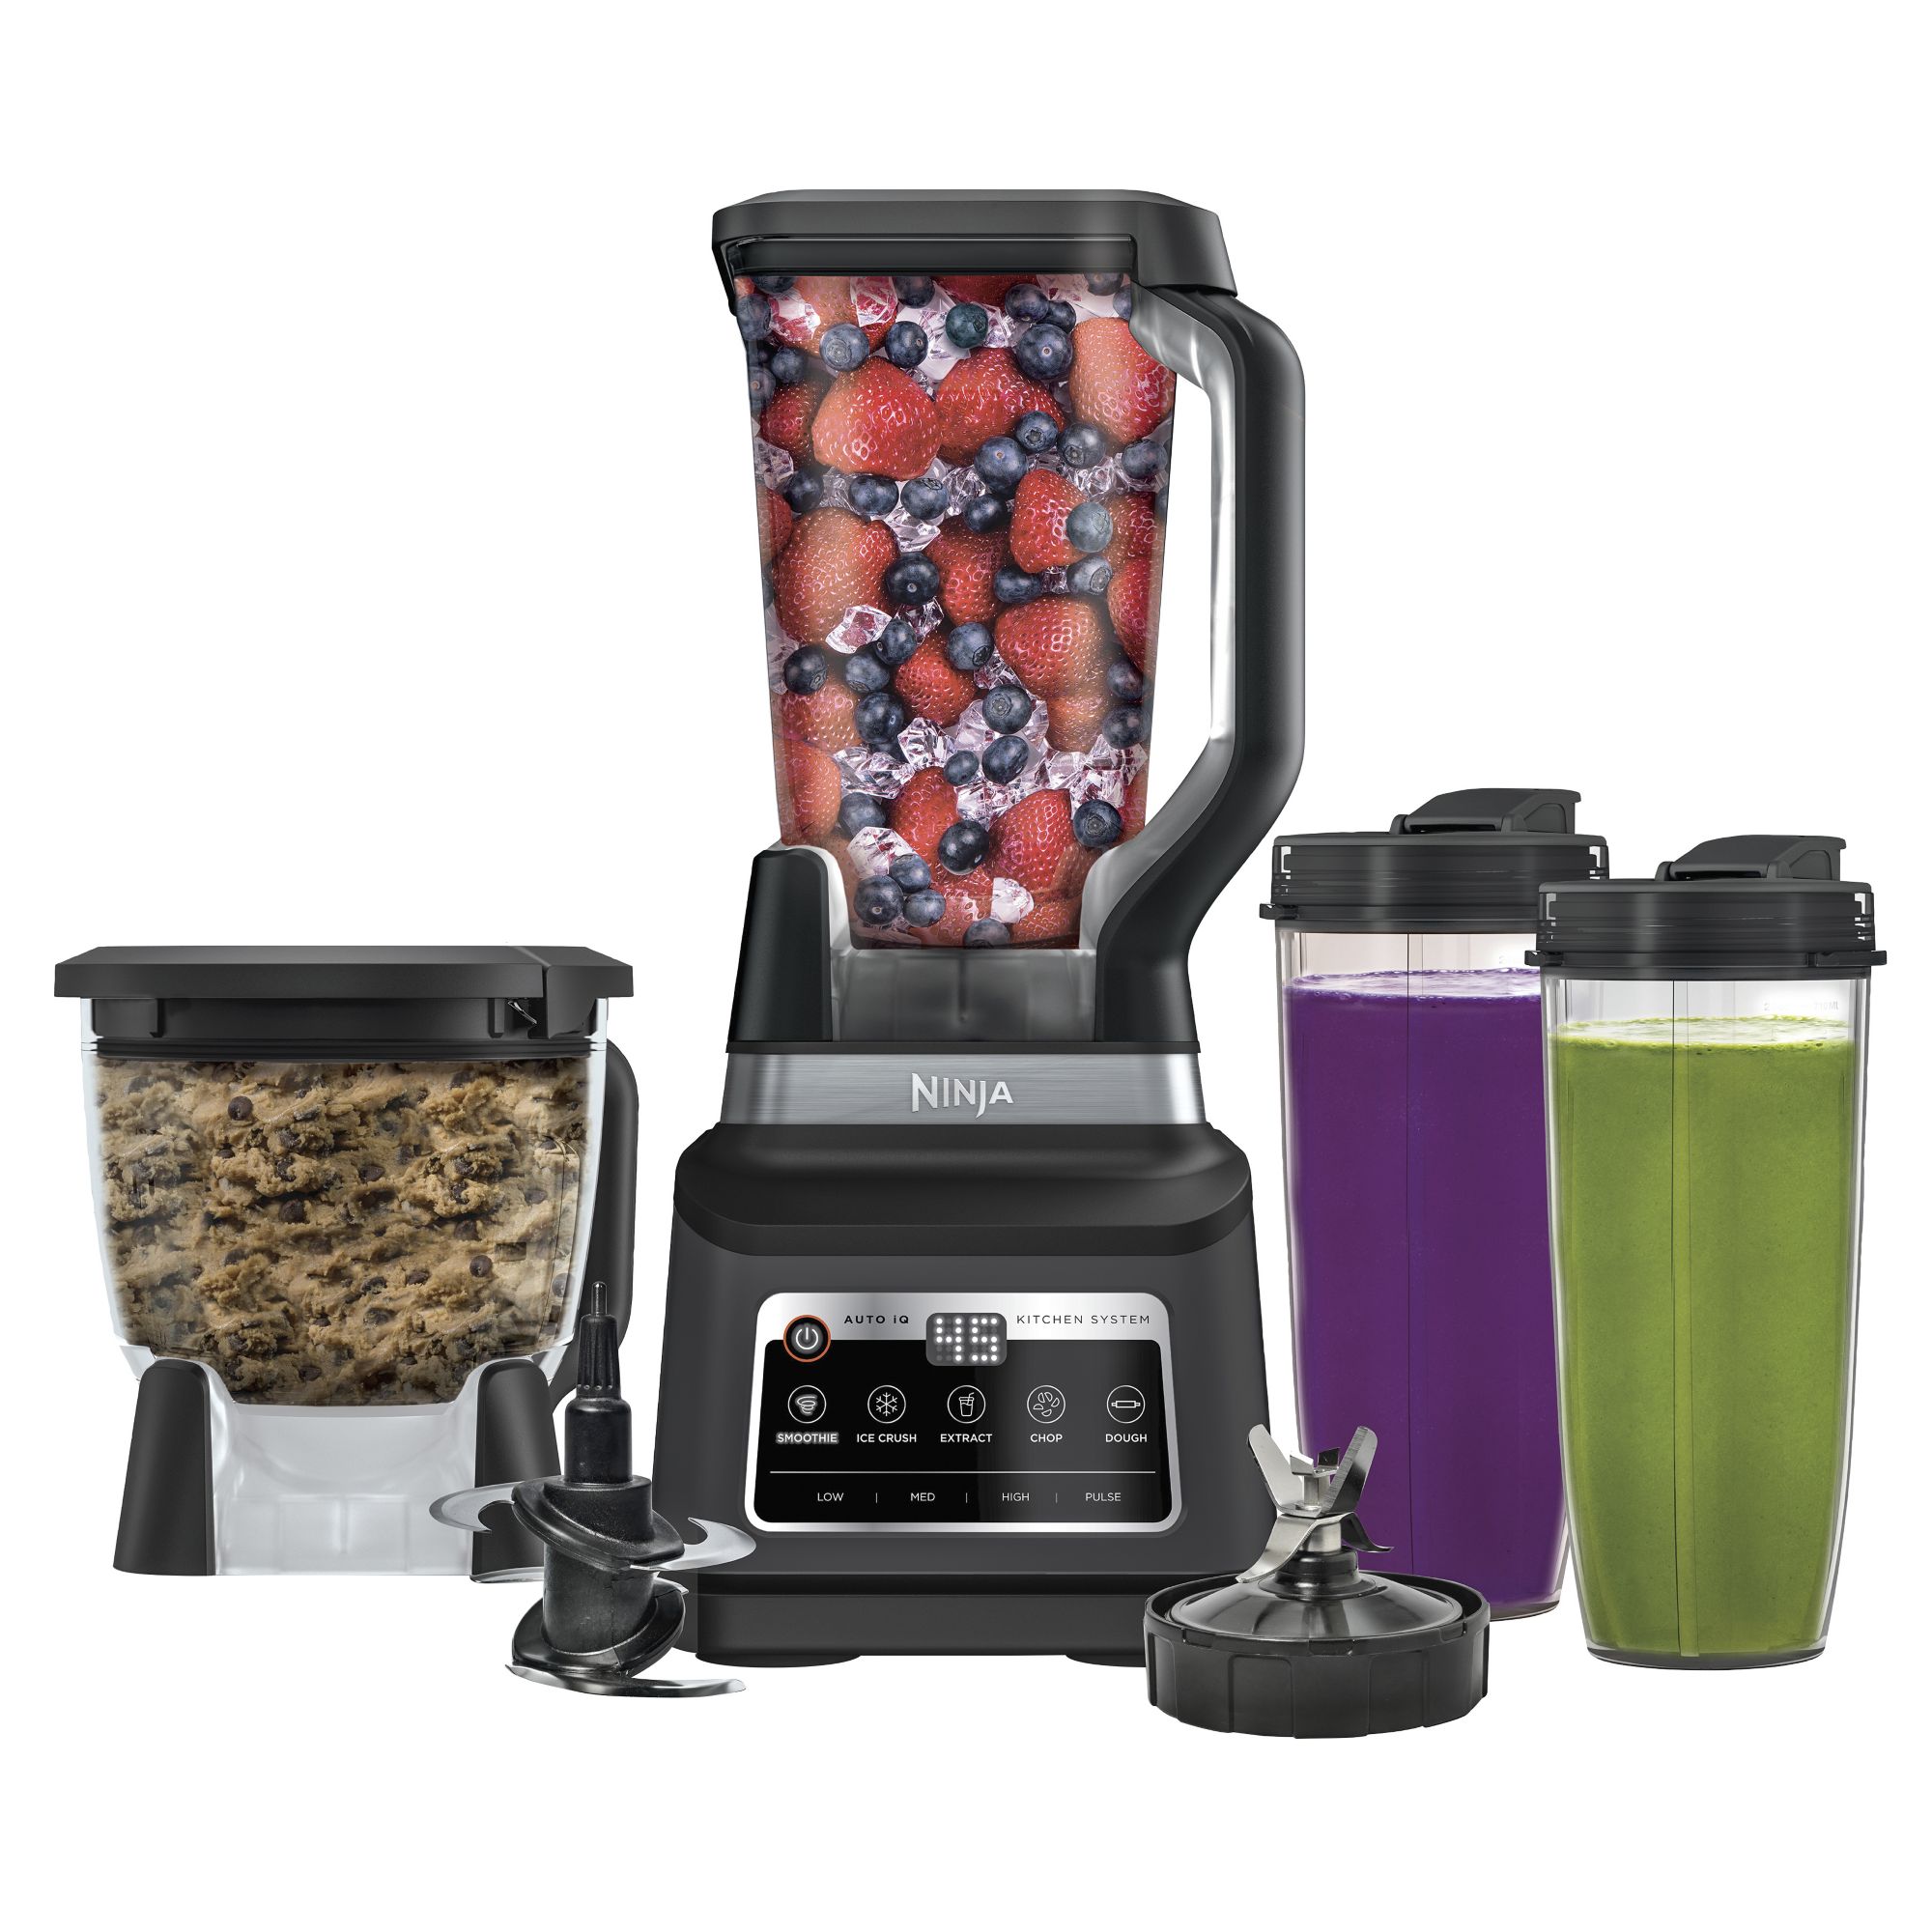 Ninja BN801 Professional Plus Kitchen System, 1400 WP, 5 Functions for  Smoothies, Chopping, Dough & More with Auto IQ, 72-oz.* Blender Pitcher,  64-oz.